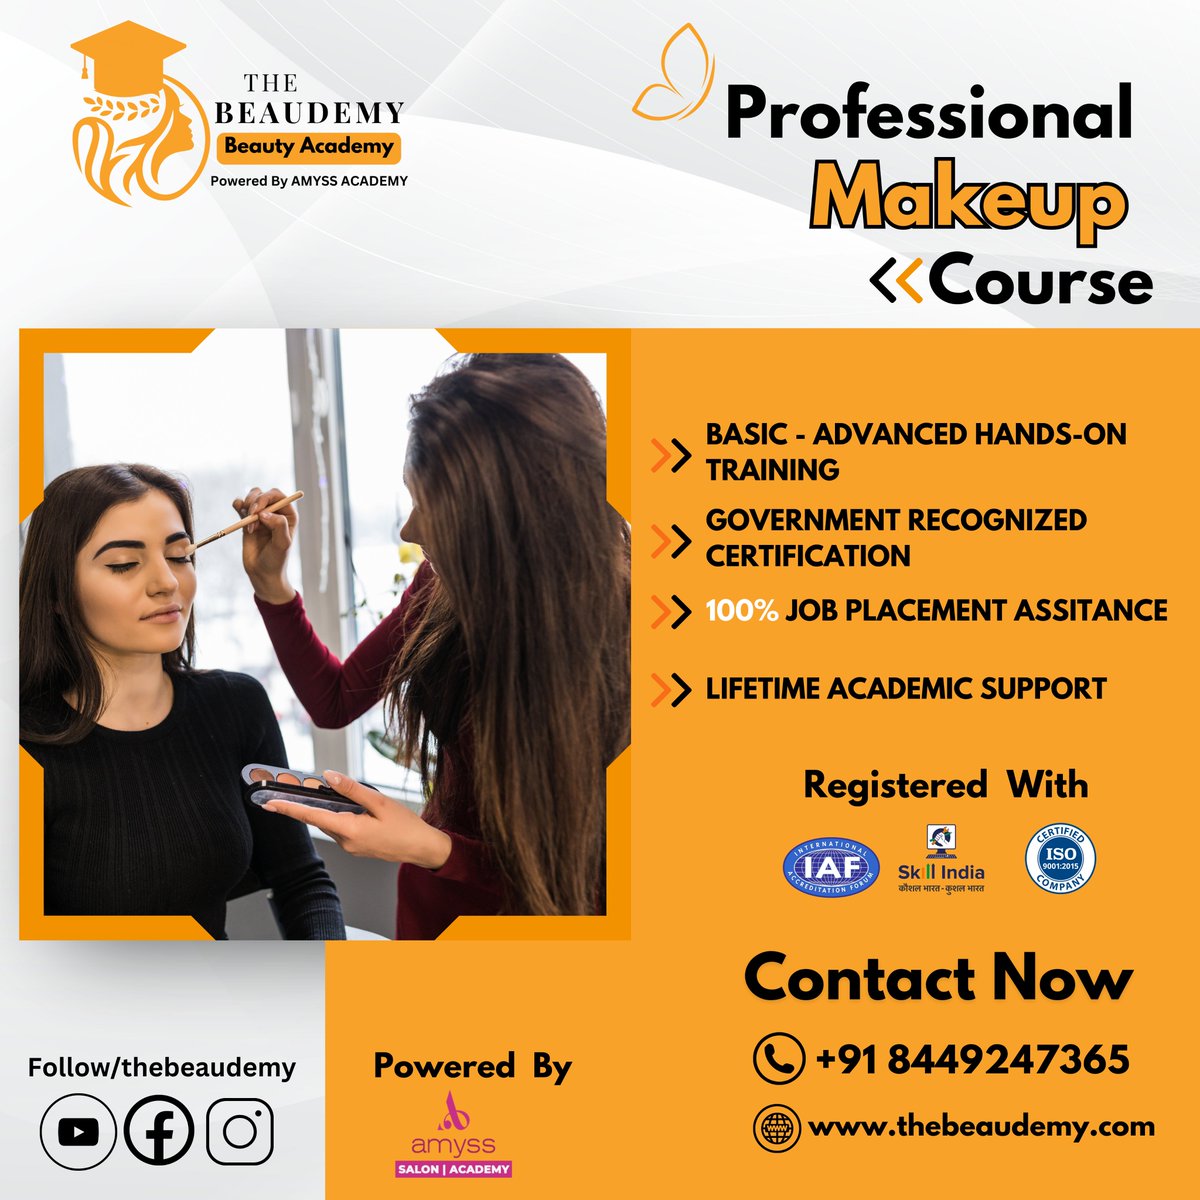 🌟 Unlock the secrets of beauty and self-care with our Makeup Course! 
🧖‍♀️💄 Join now to learn the latest techniques in skincare, makeup, haircare, and more!
#BeauDemyAcademy #BeautyEducation #Hyderabad #bestbeautyacademy #MakeupCourse #BeautySchool  #MakeupArtist #BeautyPassion